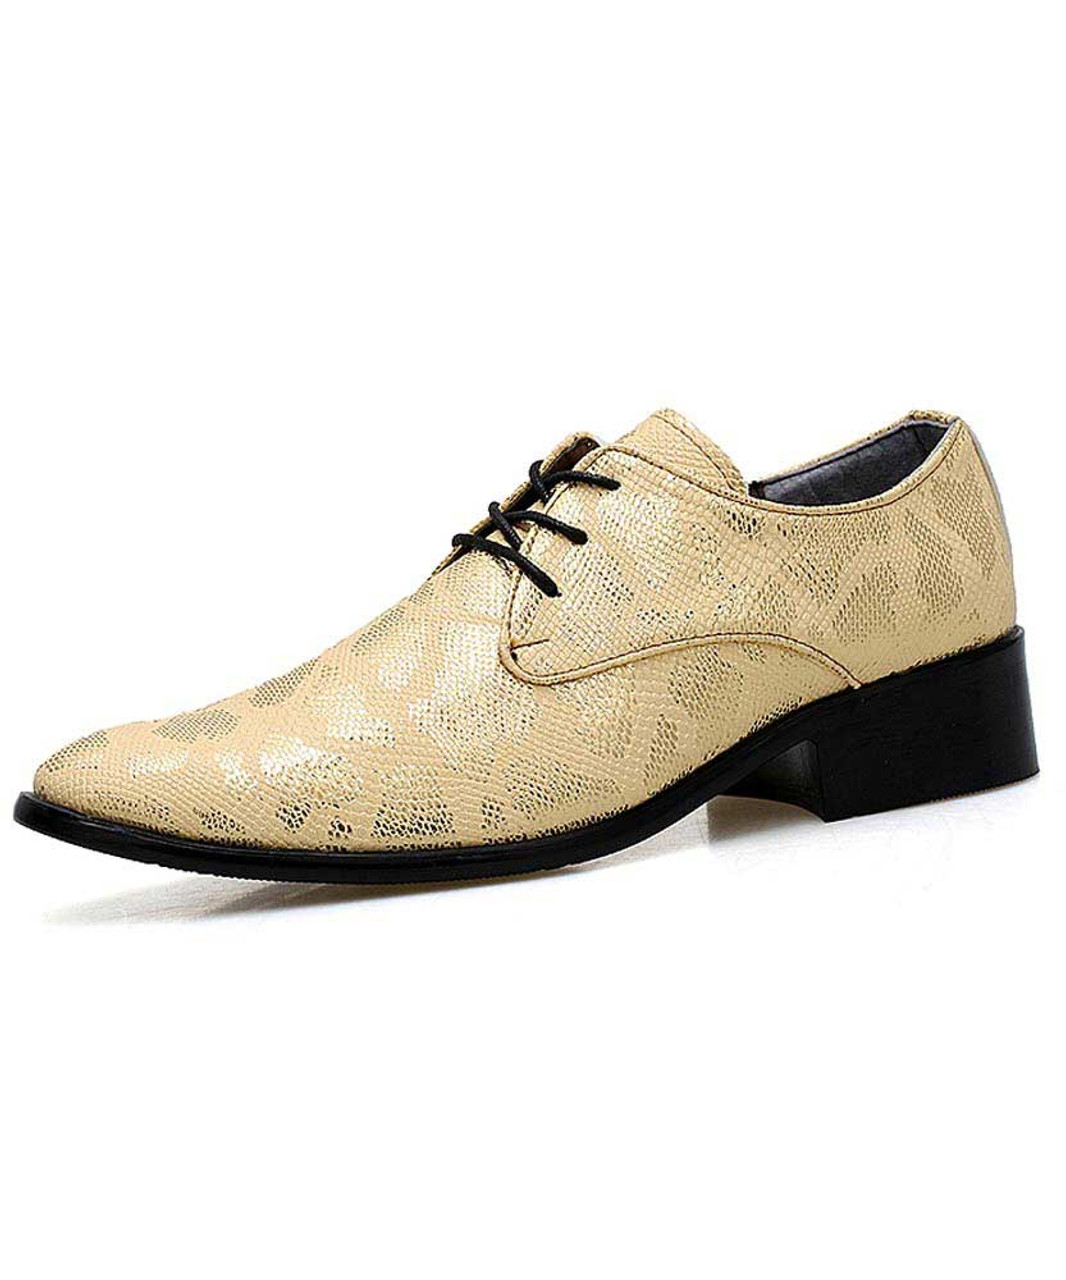 snakeskin oxford shoes